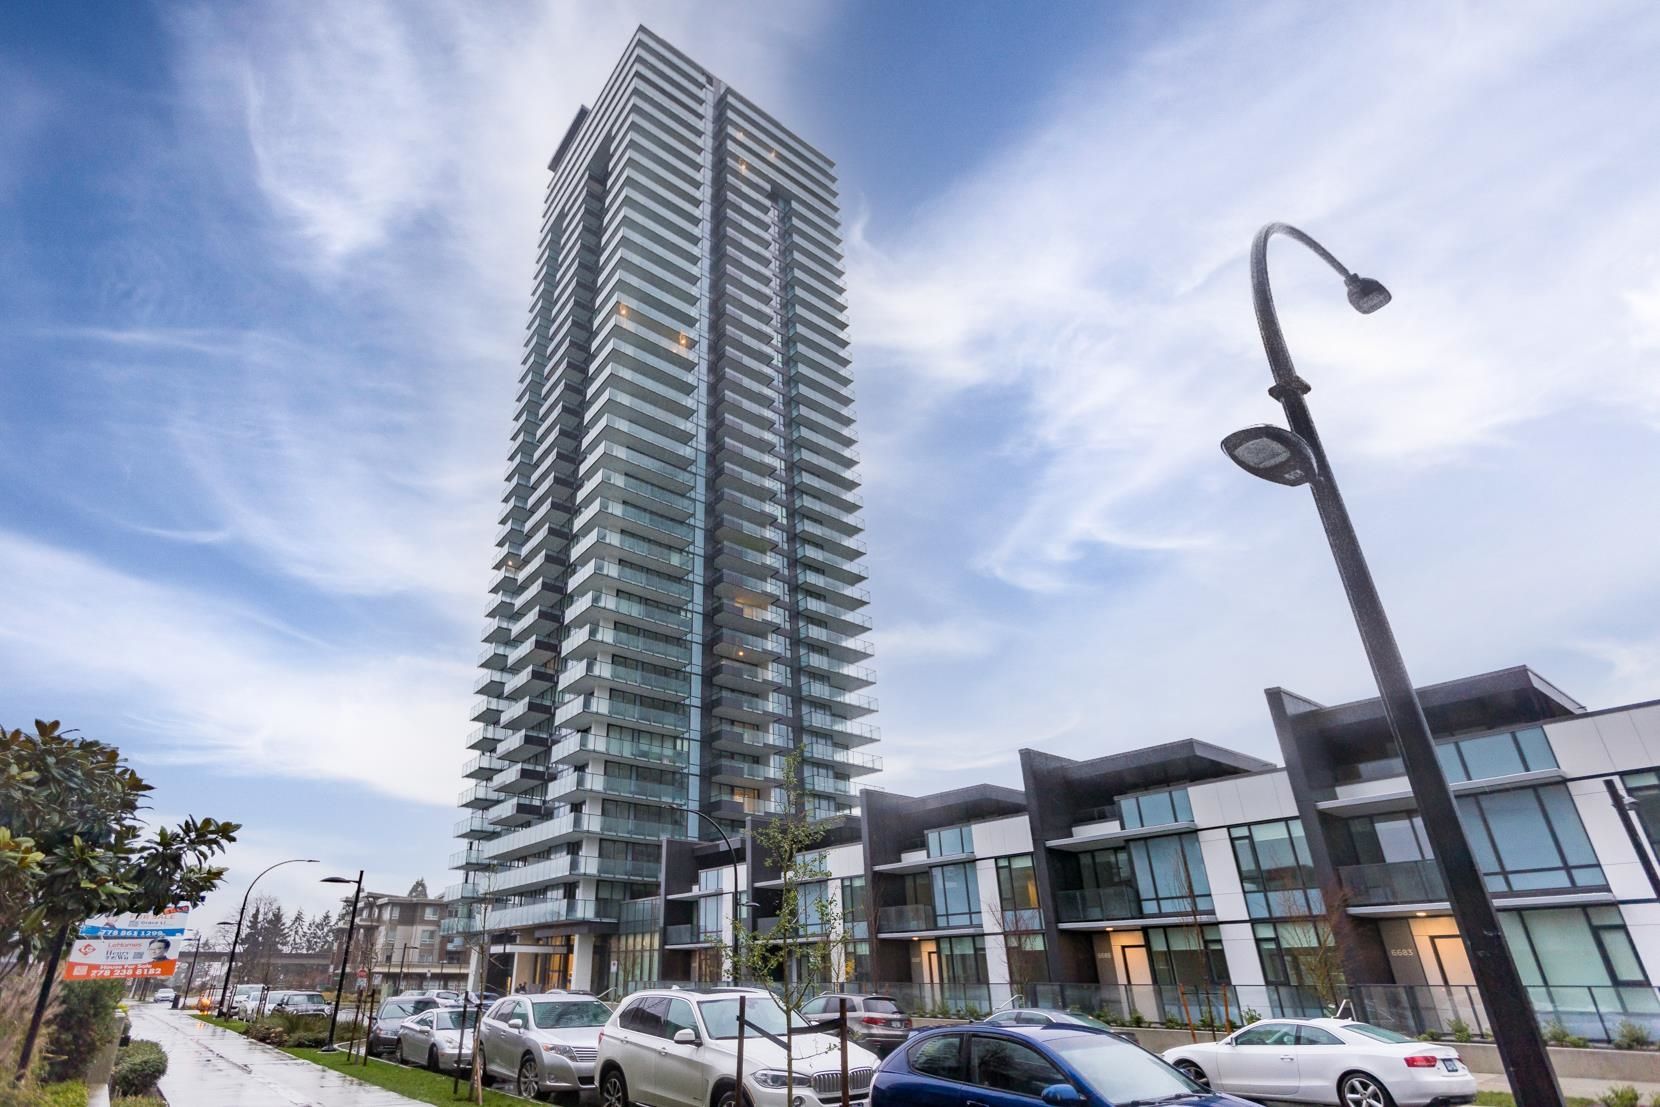 Main Photo: 2102 6699 DUNBLANE Avenue in Burnaby: Metrotown Condo for sale (Burnaby South)  : MLS®# R2853258